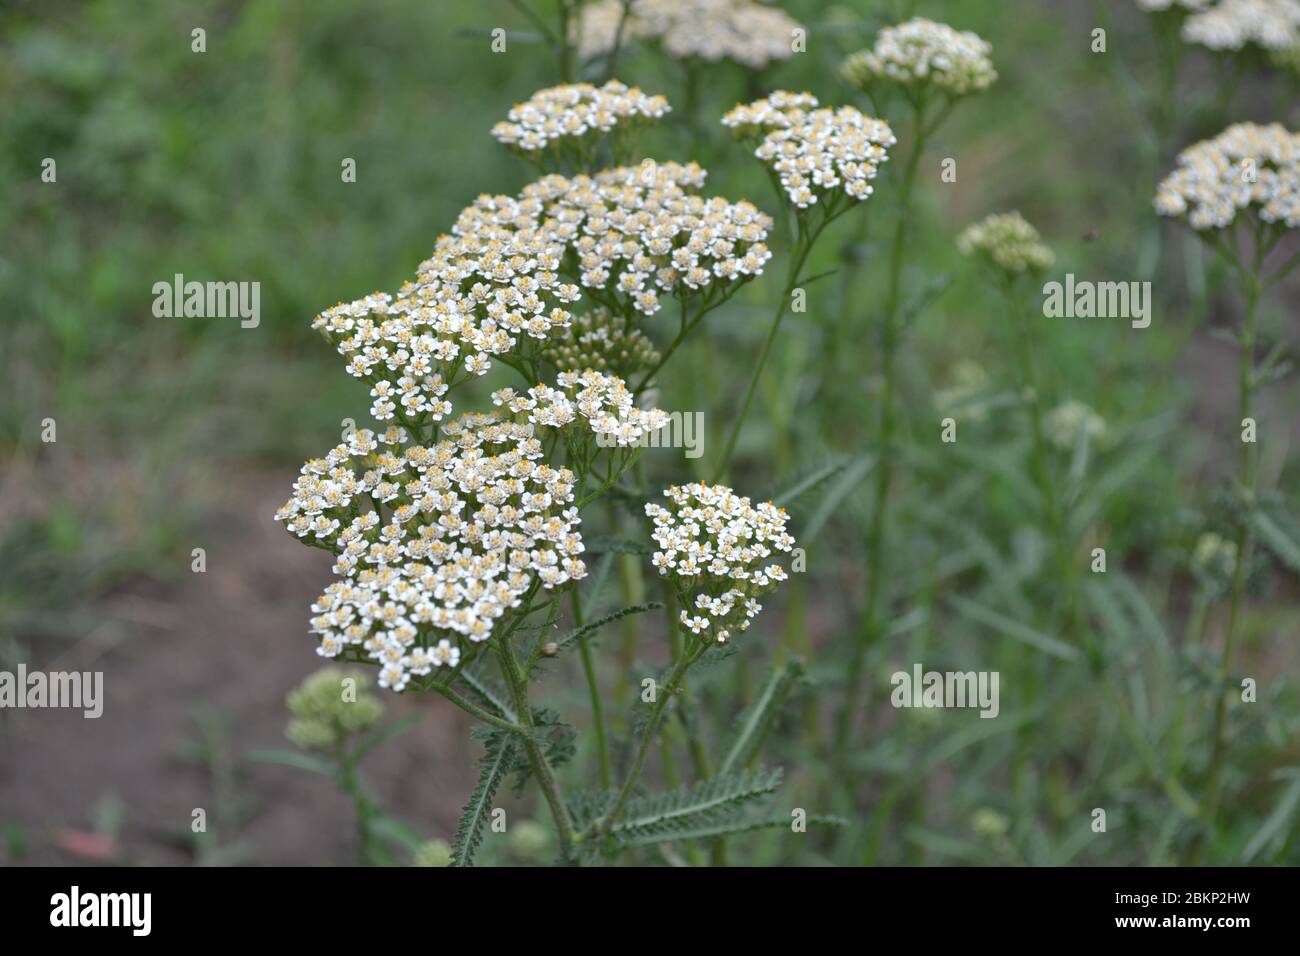 Achillea millefolium, a hairy herb with a rhizome, an Asteraceae family. White flowers surrounded by leaves. Horizontal photo Stock Photo